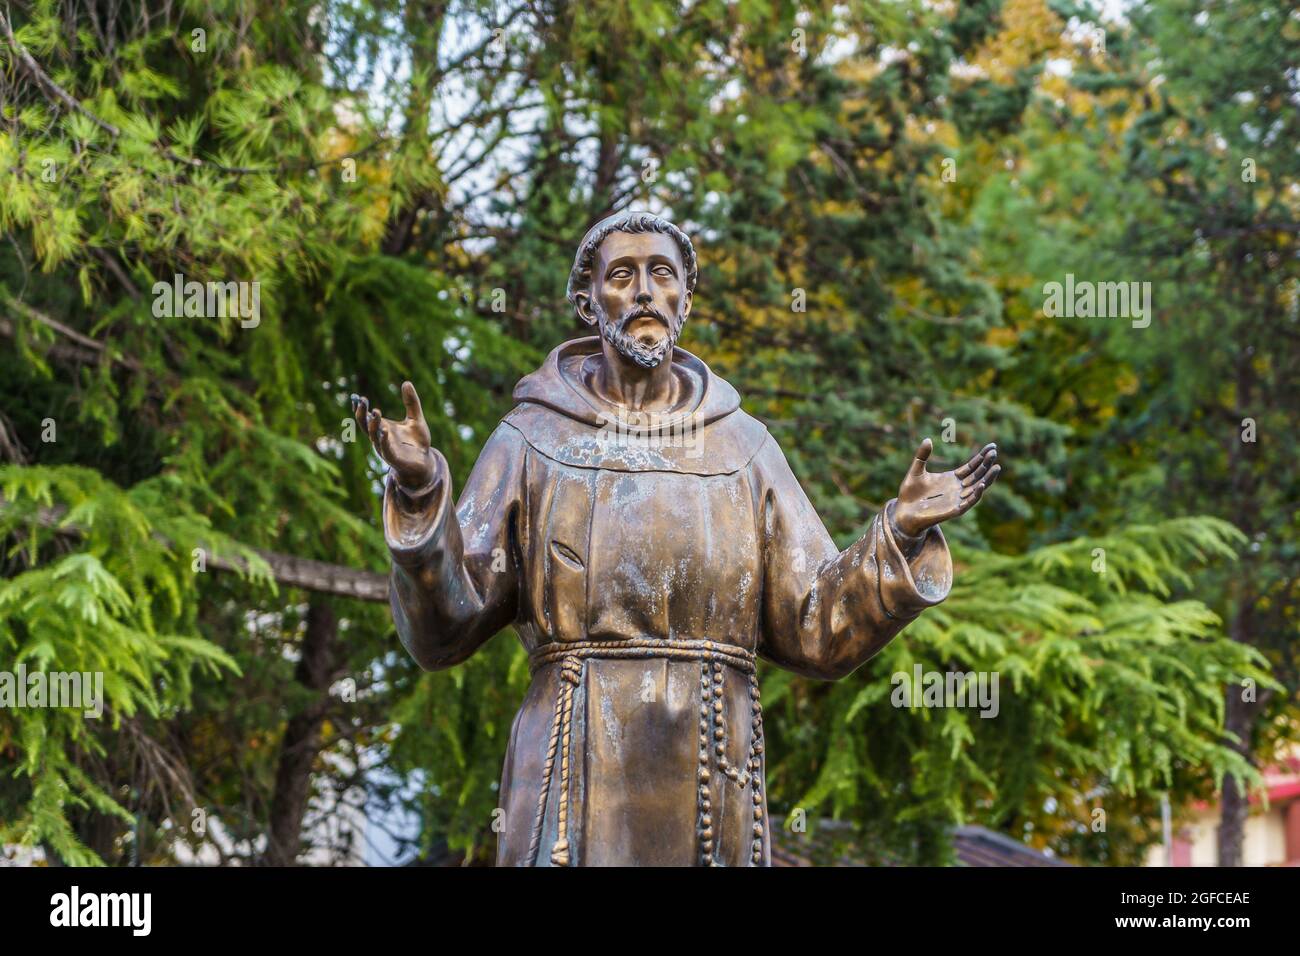 Statue of St Francis of Assisi outside of Franciscan complex of the Church of Santa Maria del Pozzo in Somma Vesuviana, Naples. Located on area occupied by an ancient medieval church. Stock Photo